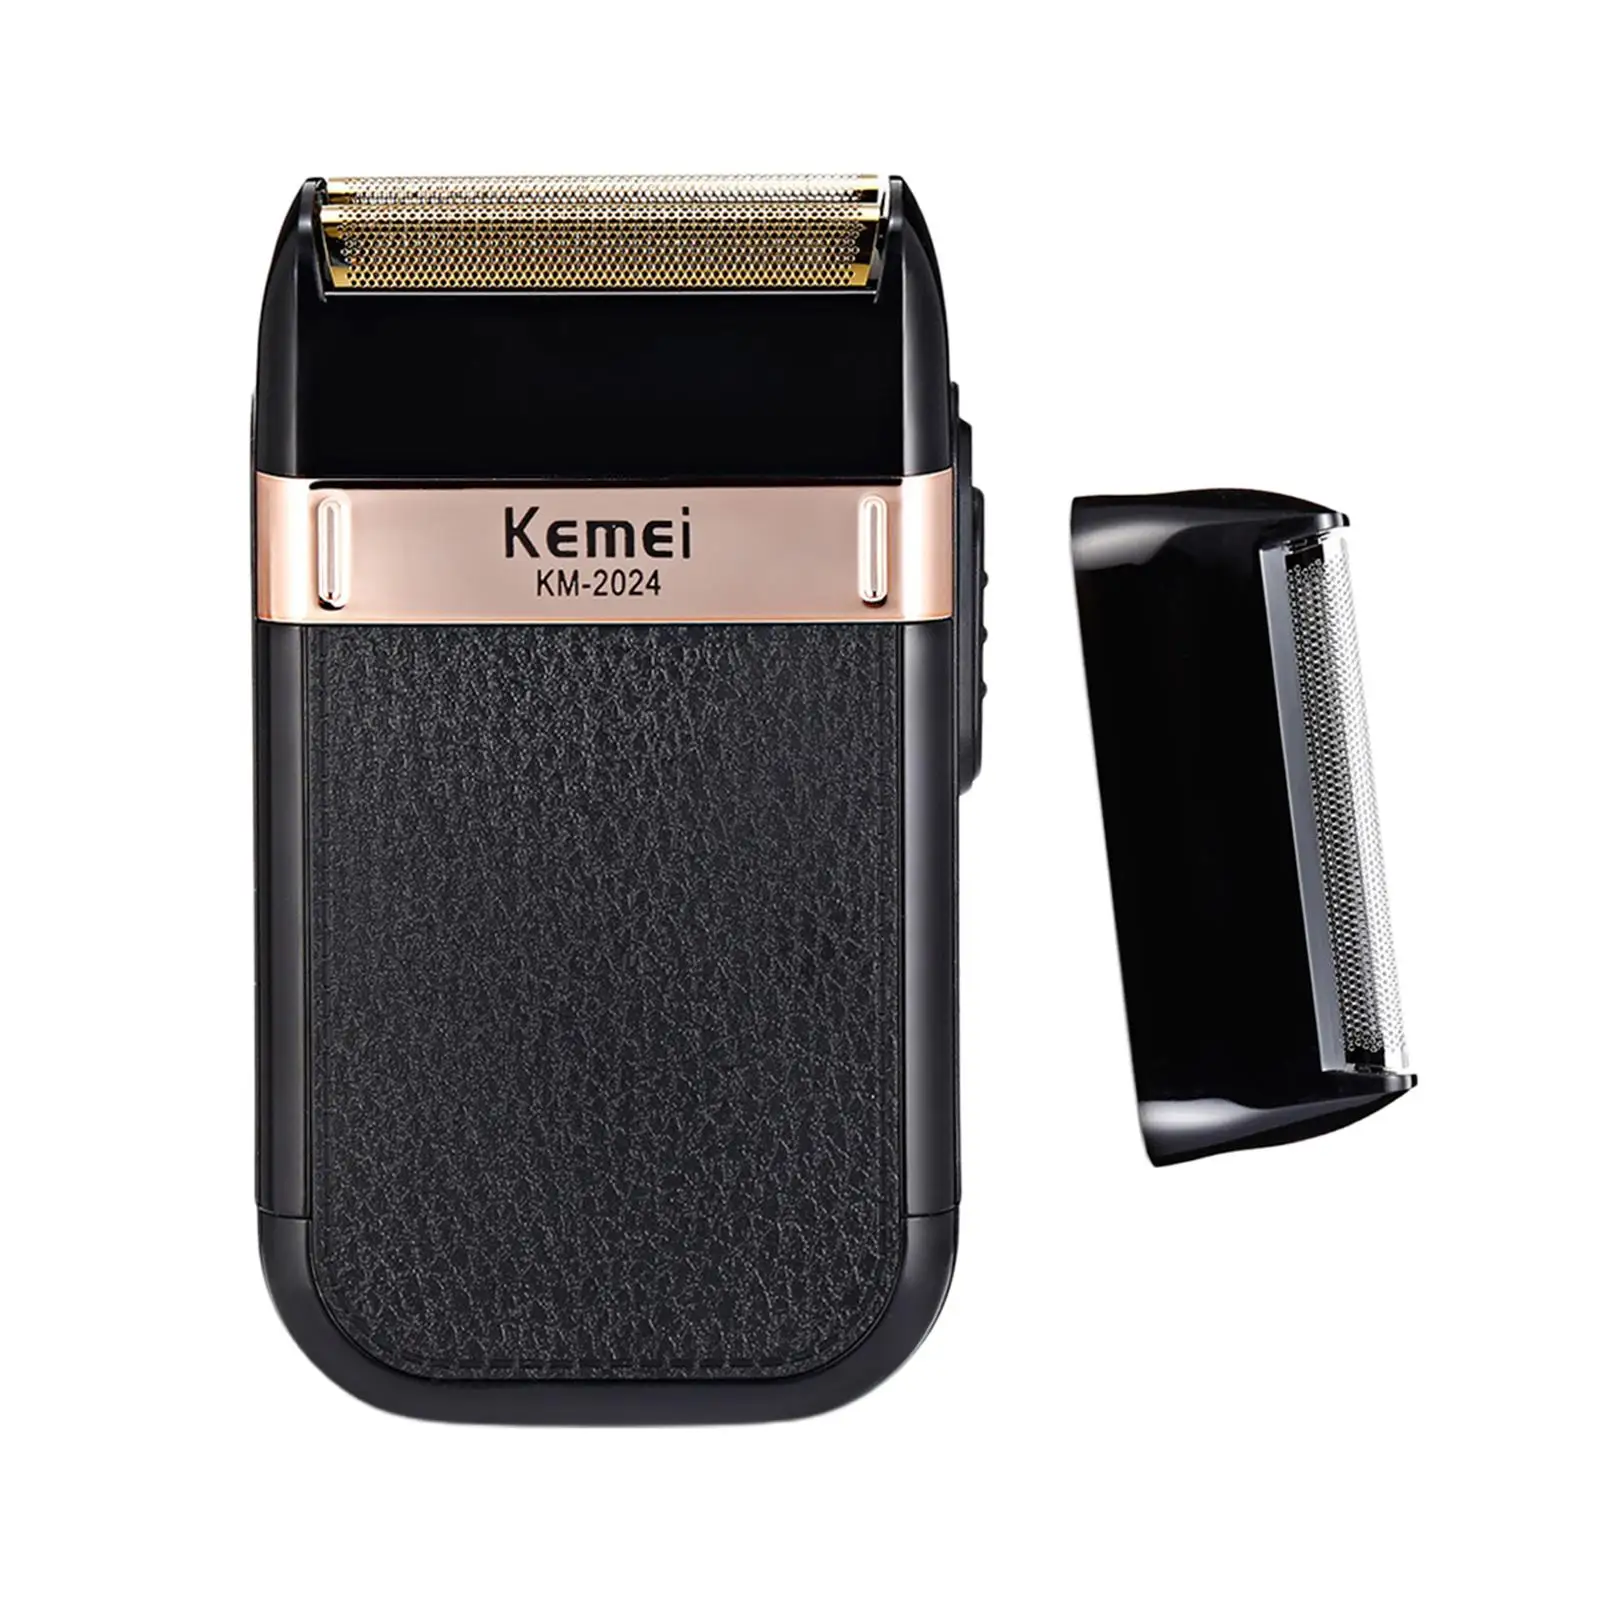 Km-2024 3W USB Shaver Beard Precision Trimmer with USB Cable for Men